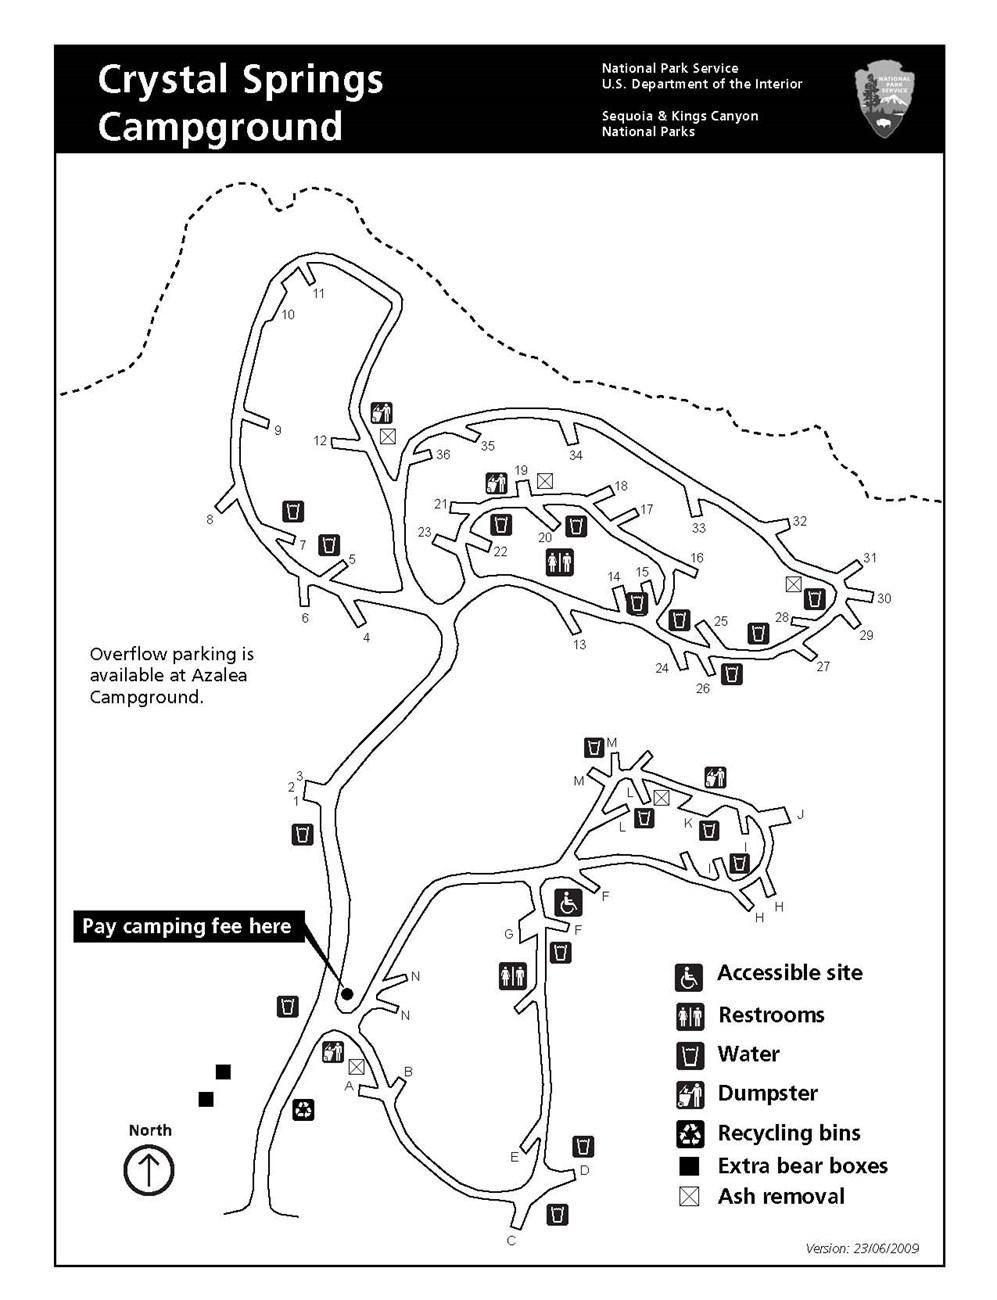 Crystal Springs Campground map, Kings Canyon National Park.